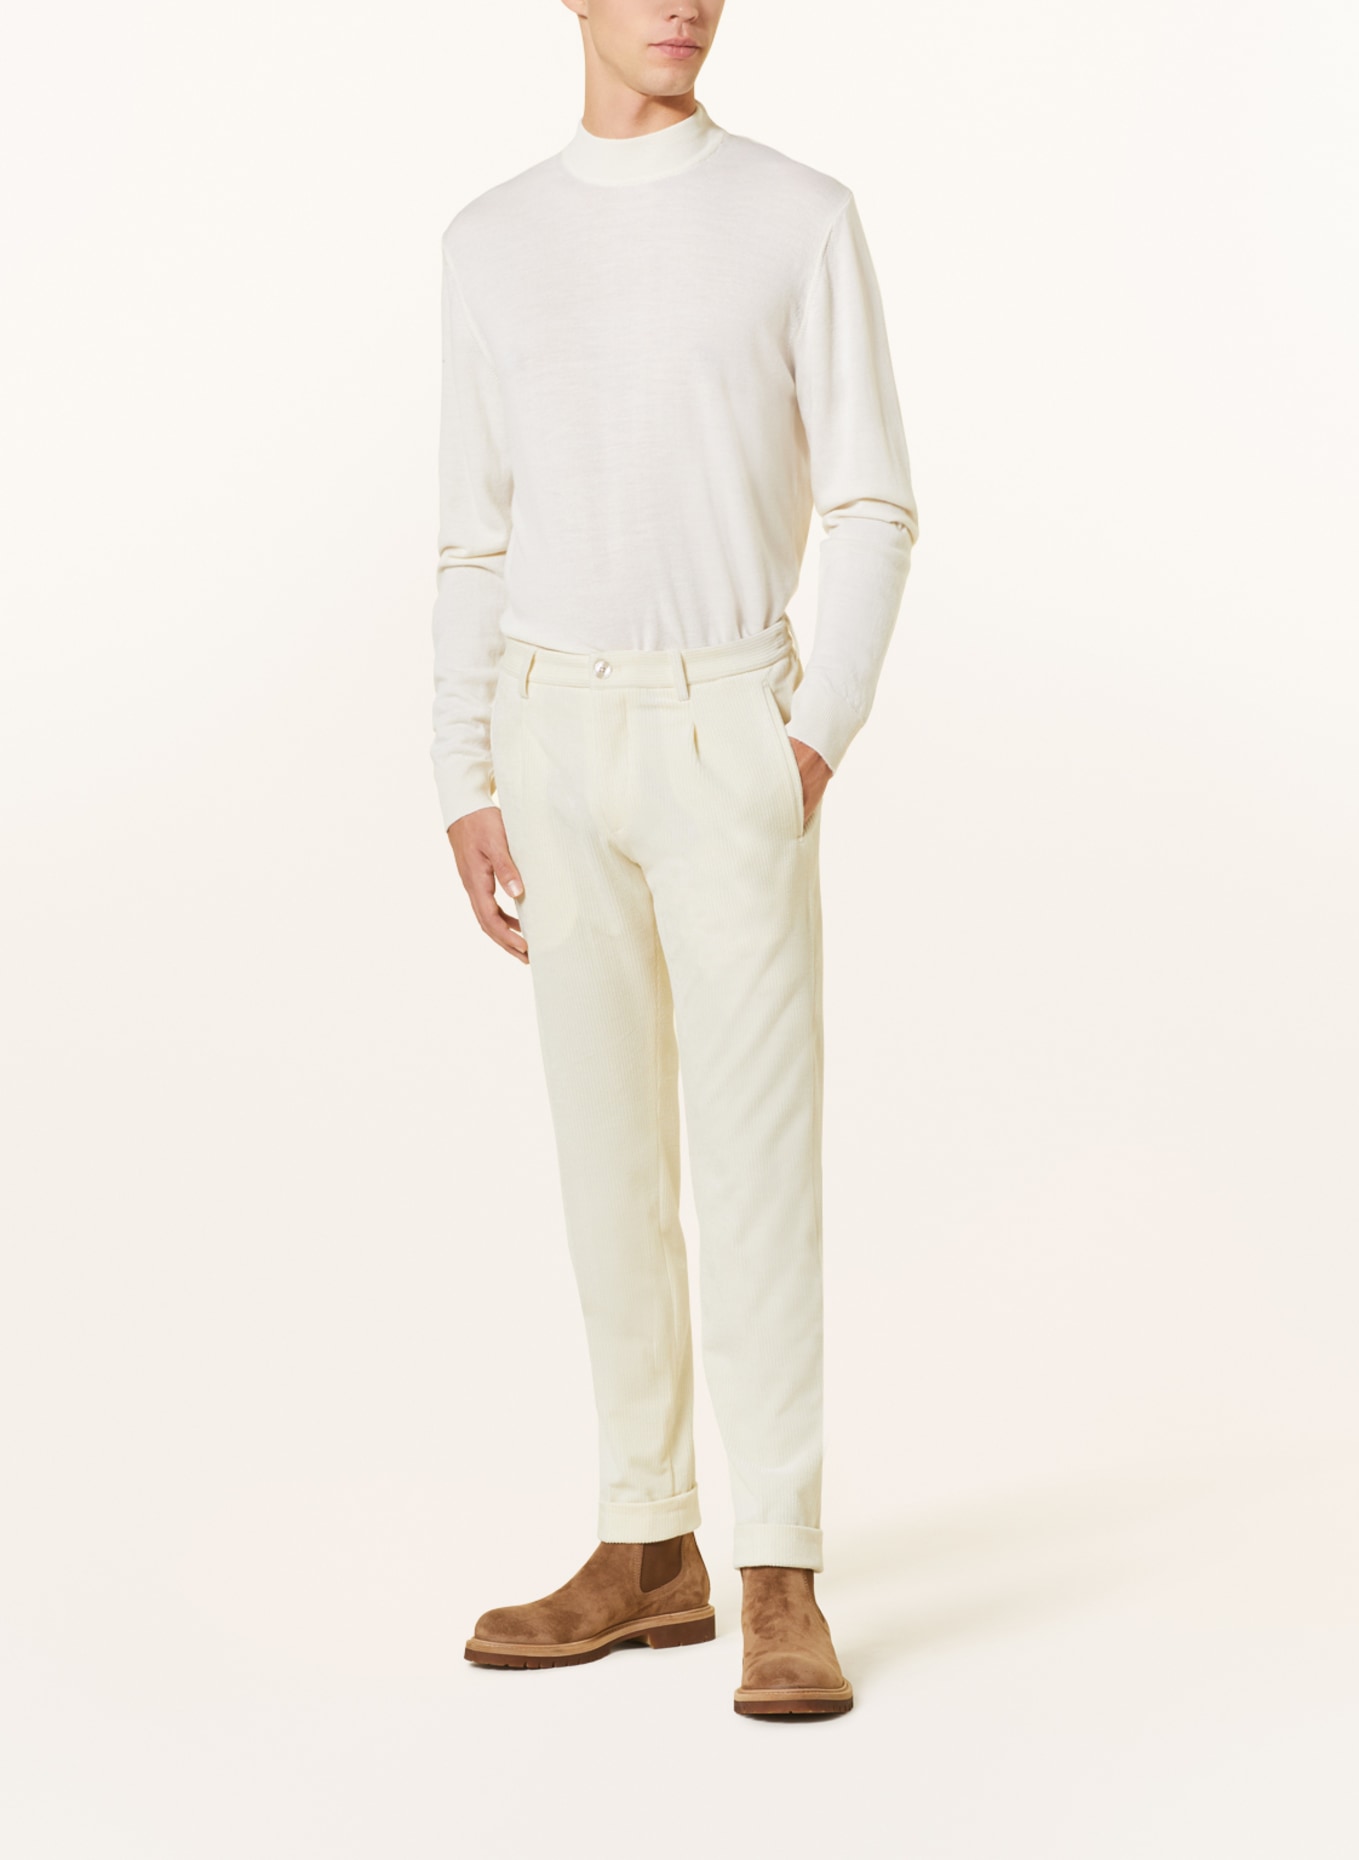 Tailored Fit Grey Twill Trousers | Buy Online at Moss